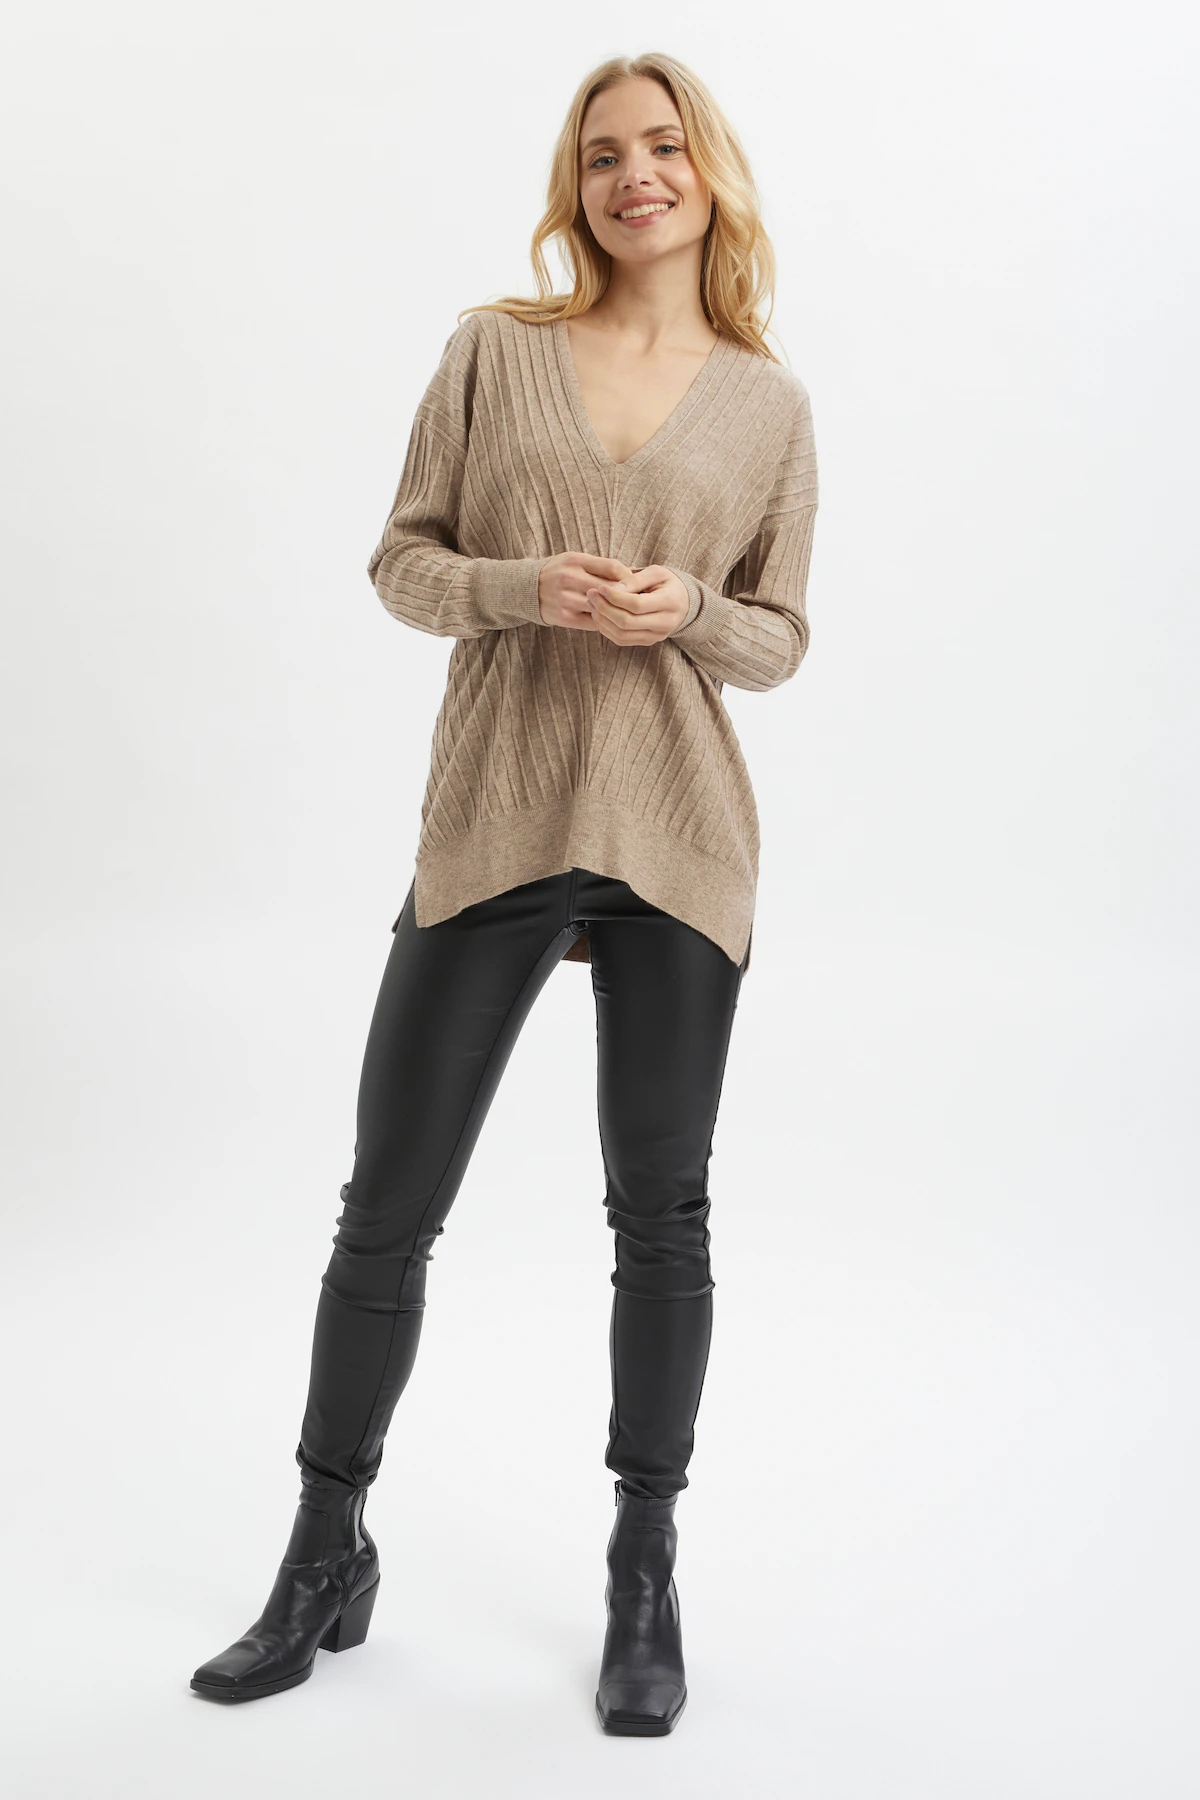 Cheap cardigans and knit wear - buy designer clothes online here